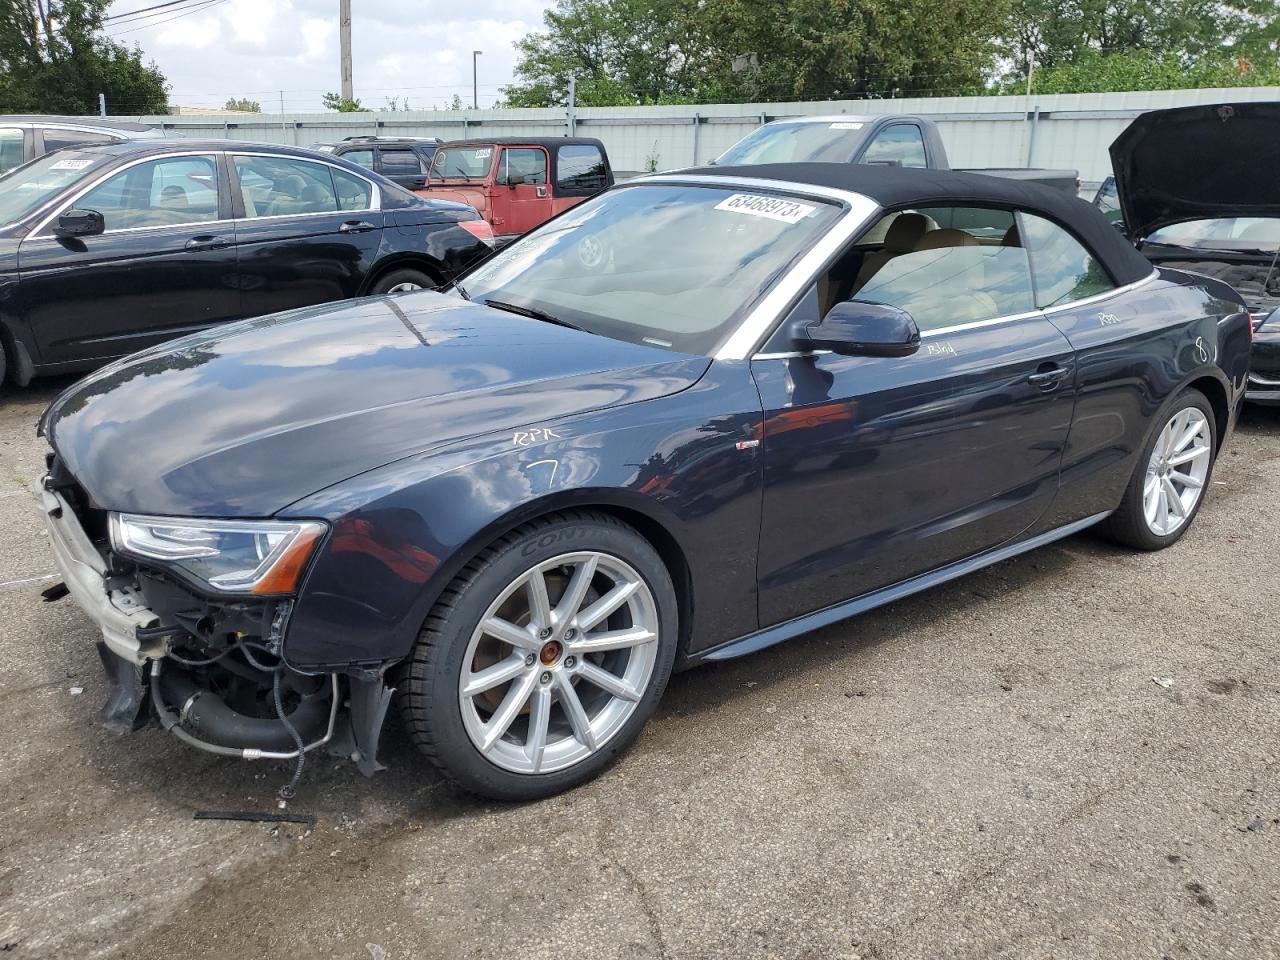 vin: WAUMFAFH8FN003353 WAUMFAFH8FN003353 2015 audi a5 2000 for Sale in 45439 1950, Oh - Dayton, Moraine, USA